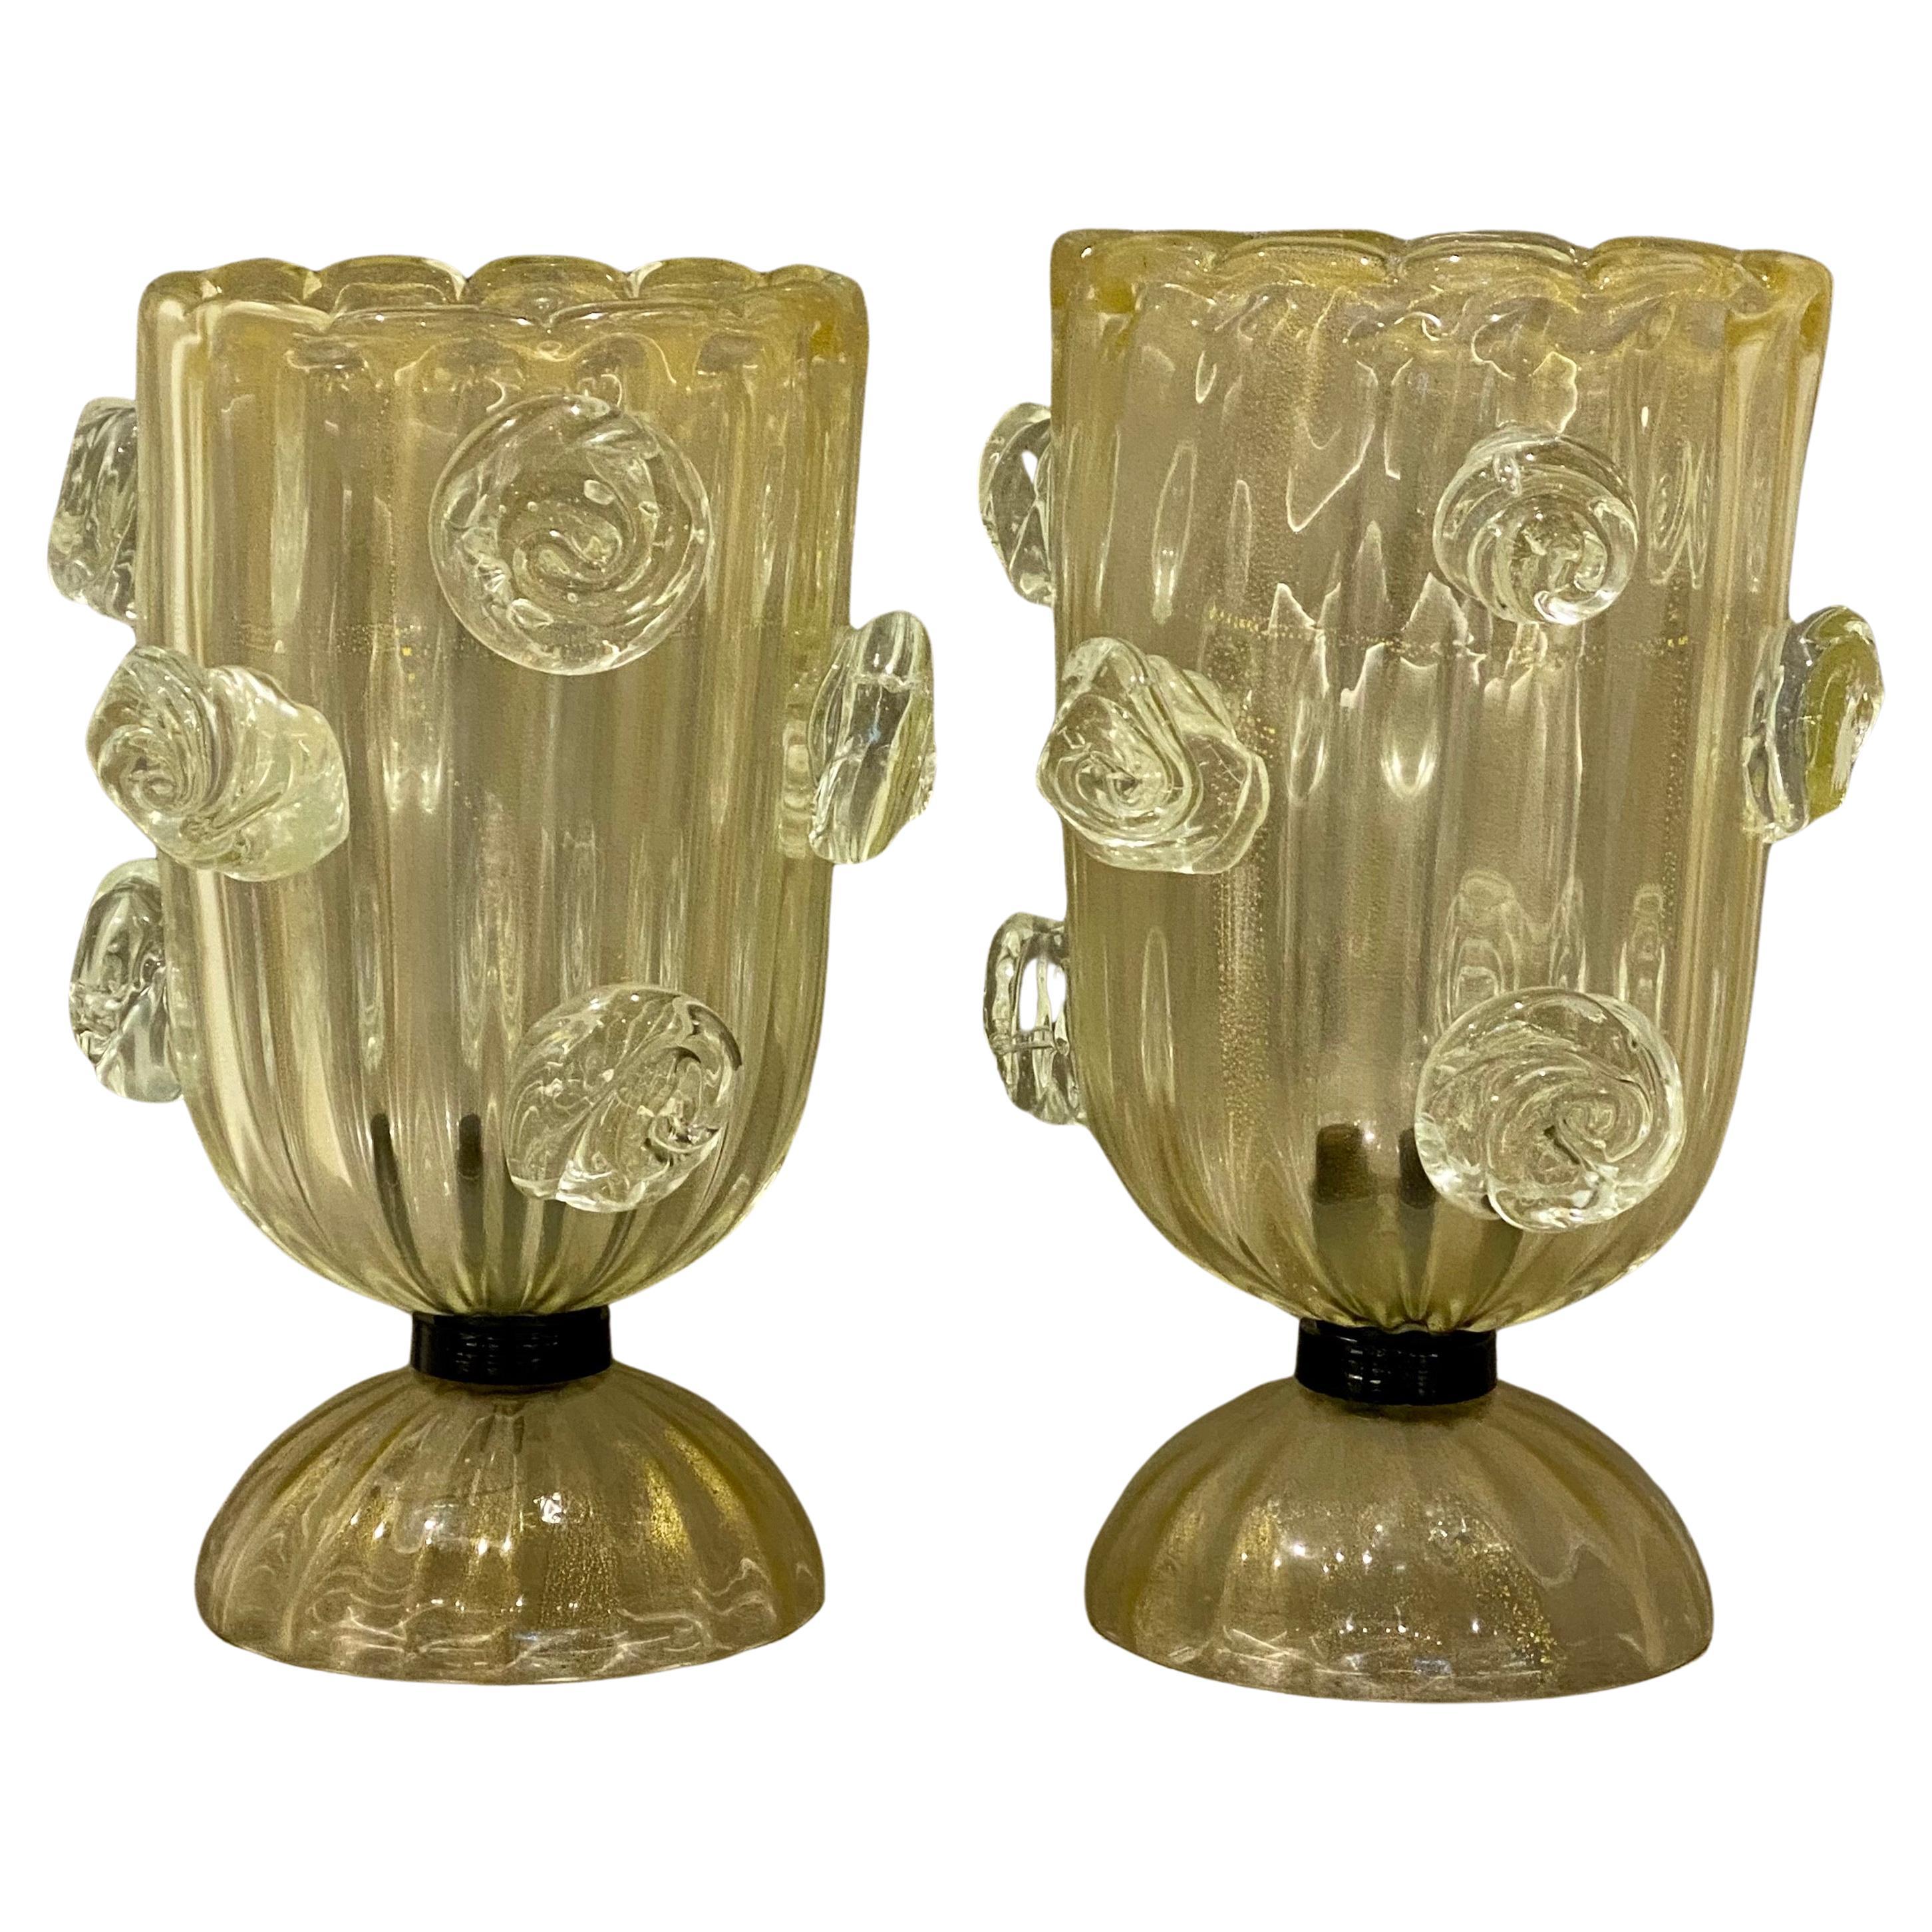 An impressive pair of Constantini Murano hand blown Italian art glass vase lamps. The pieces have crimped rims and applied foot. and made with very thick yellow glass with gold iridescence , they look large and imposing and are presented in